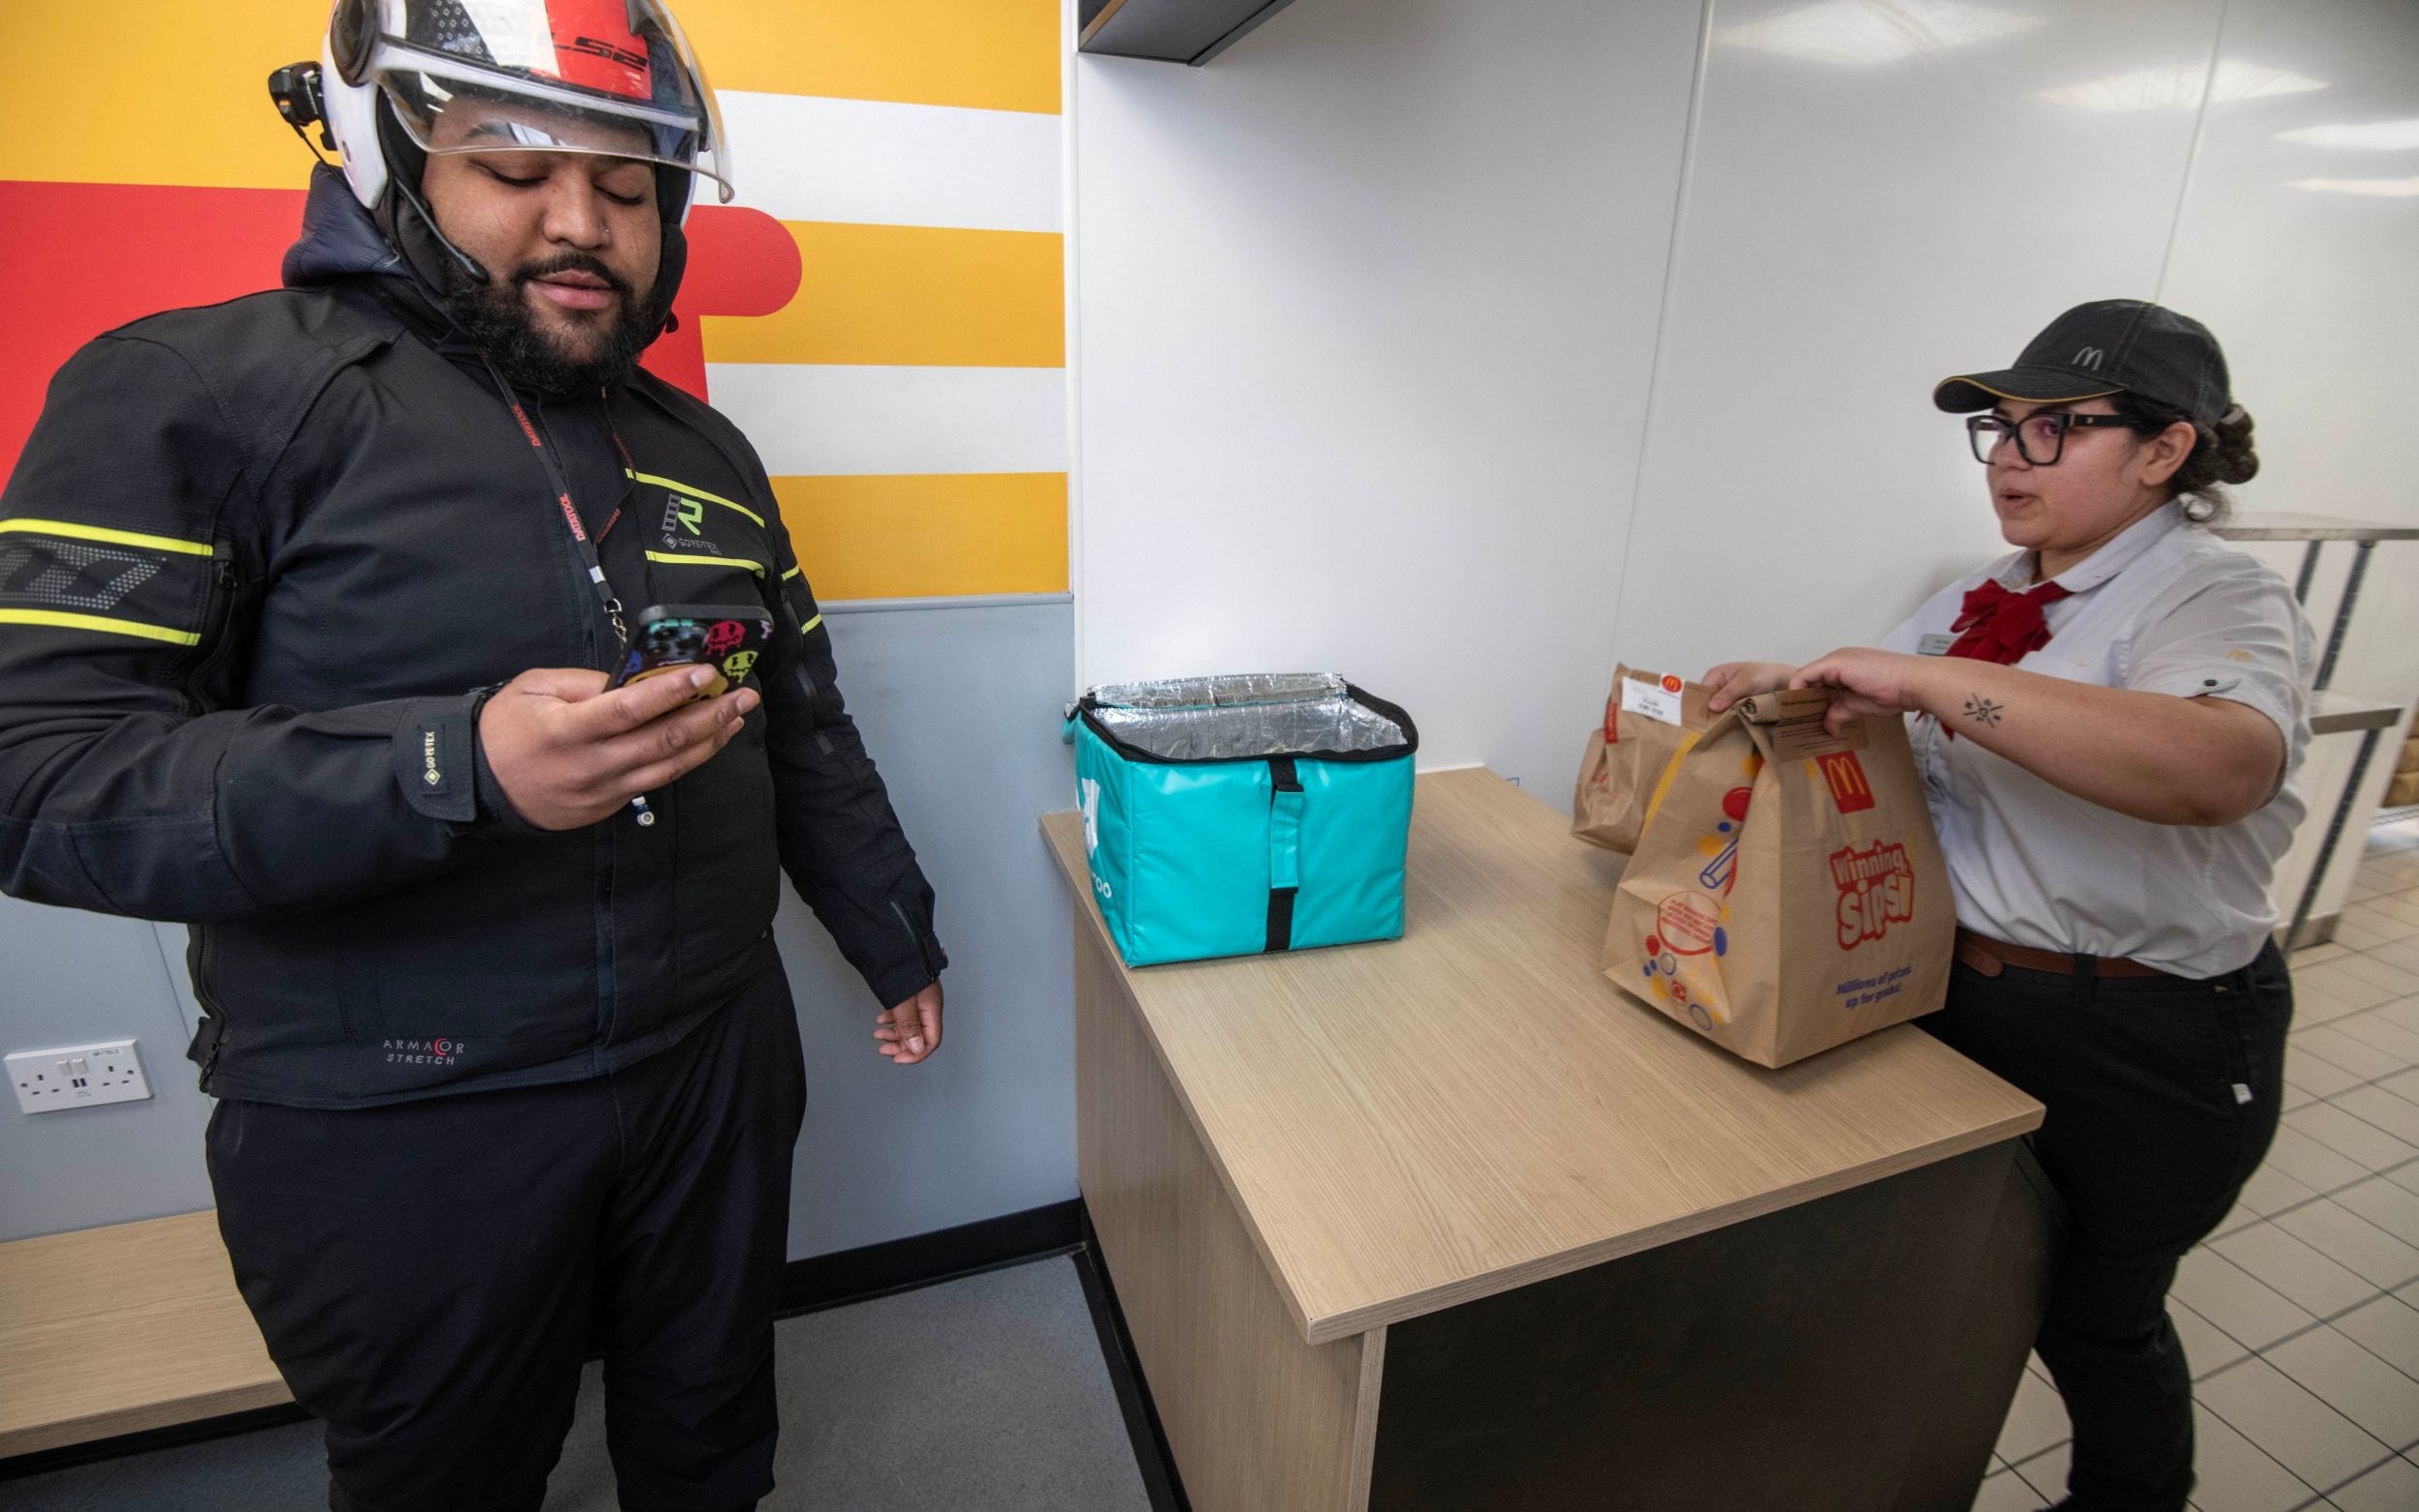 amazon, inside the ‘dark kitchens’ catering to britain’s appetite for takeaways